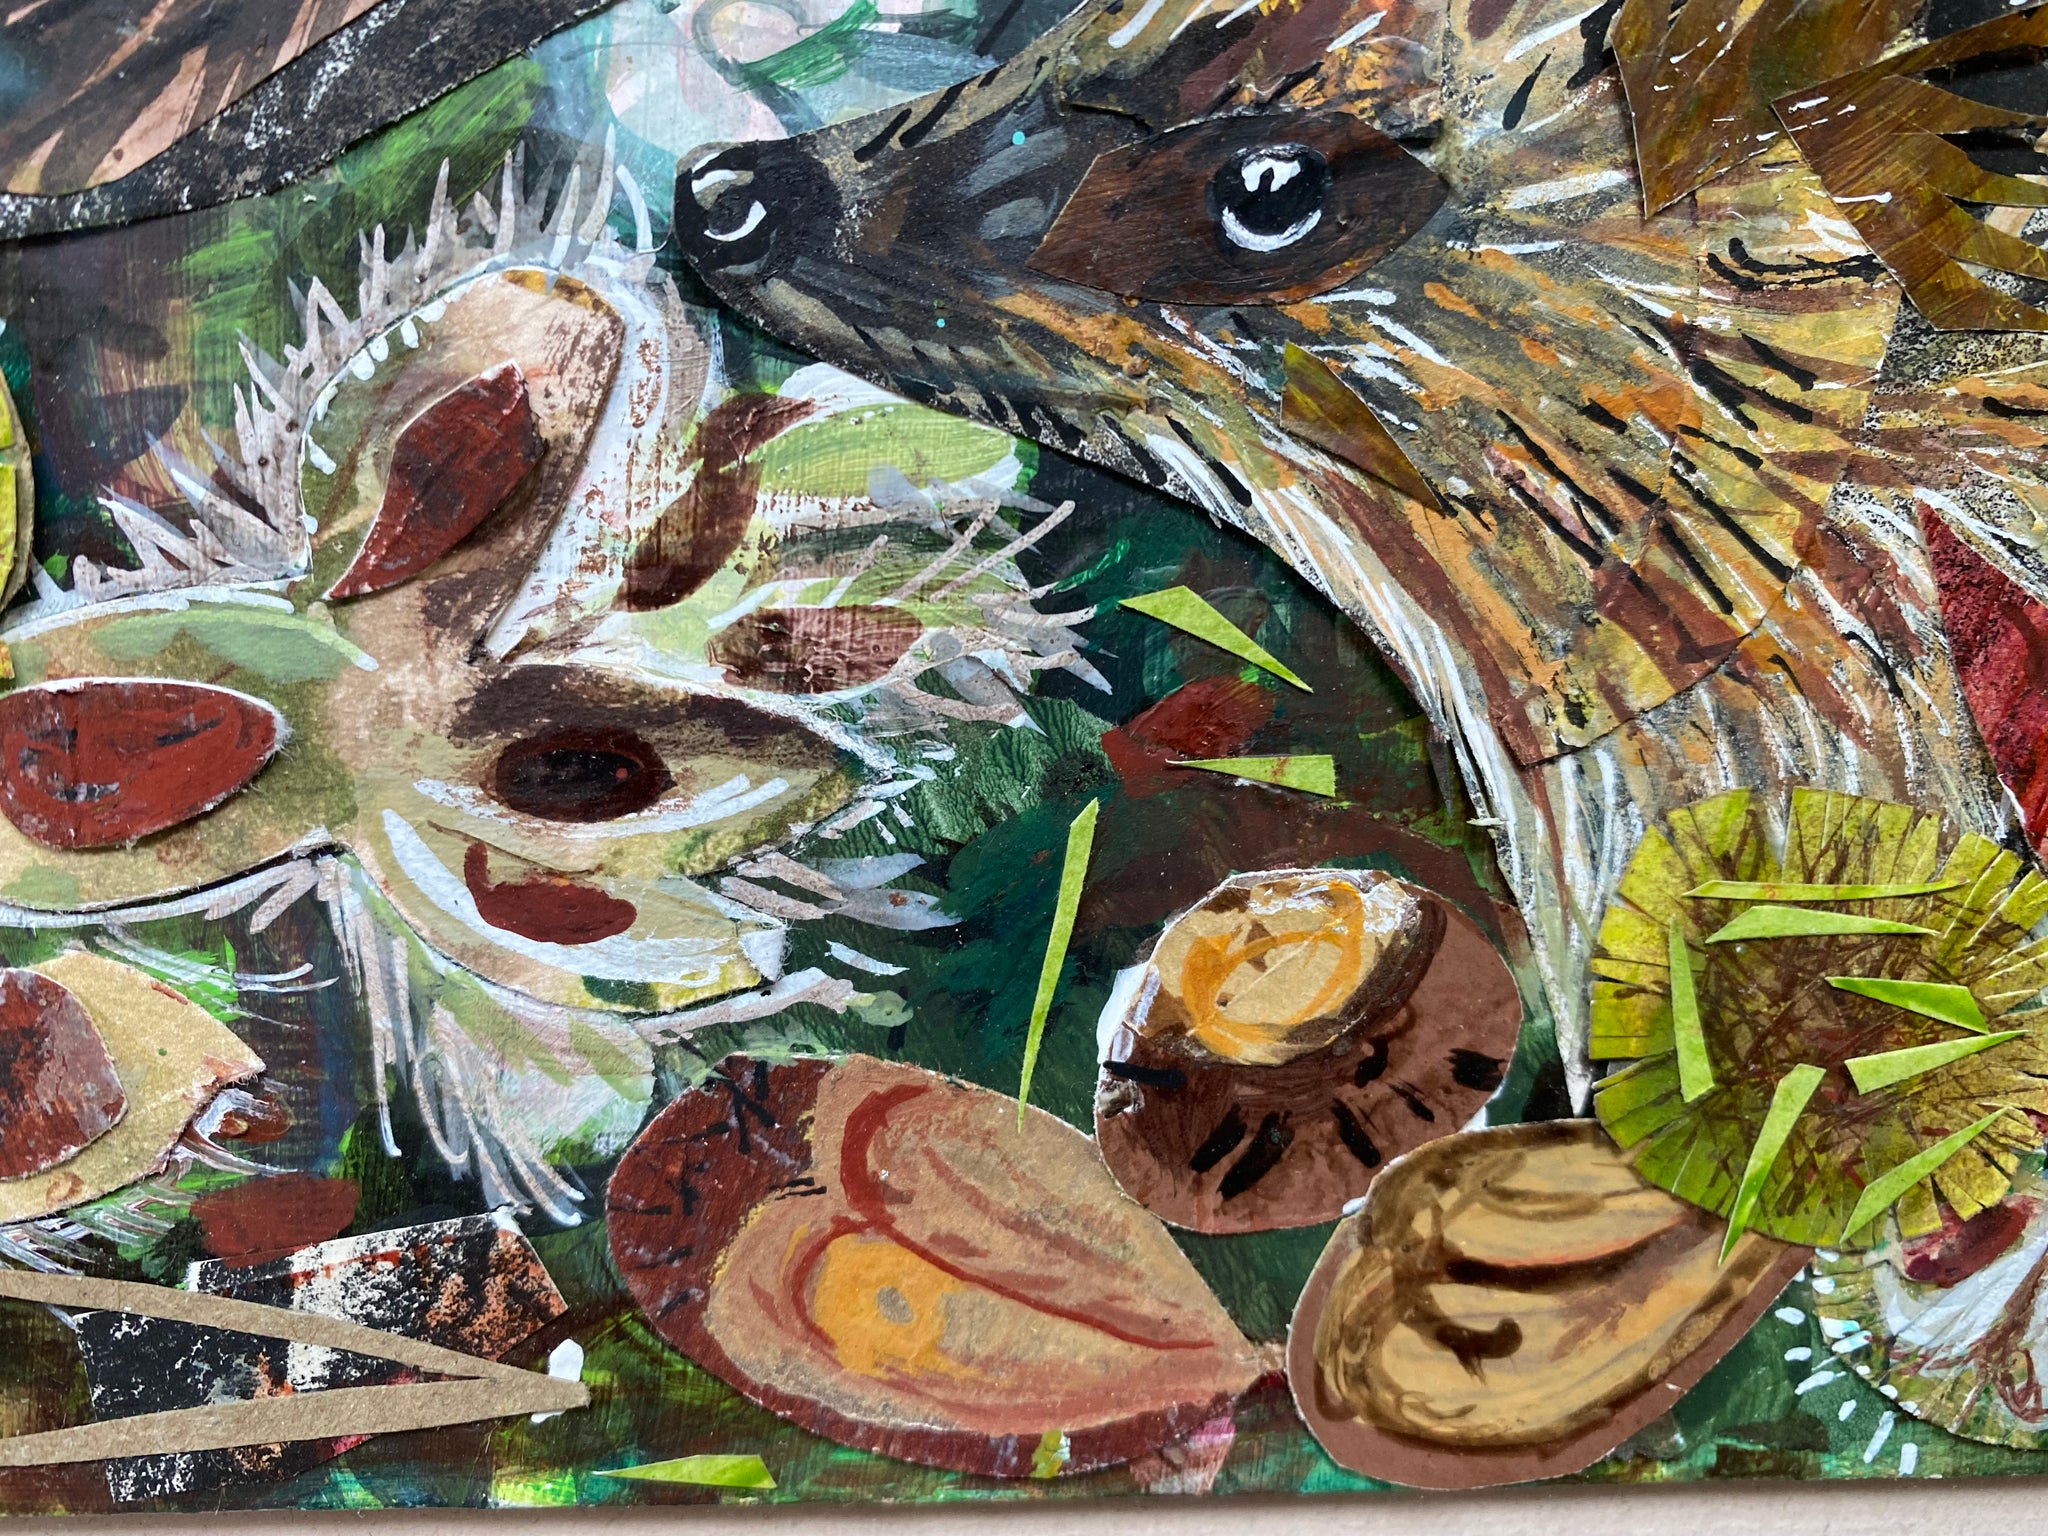 Hedgehogs and chestnuts - Original Mixed Media Framed Painting.